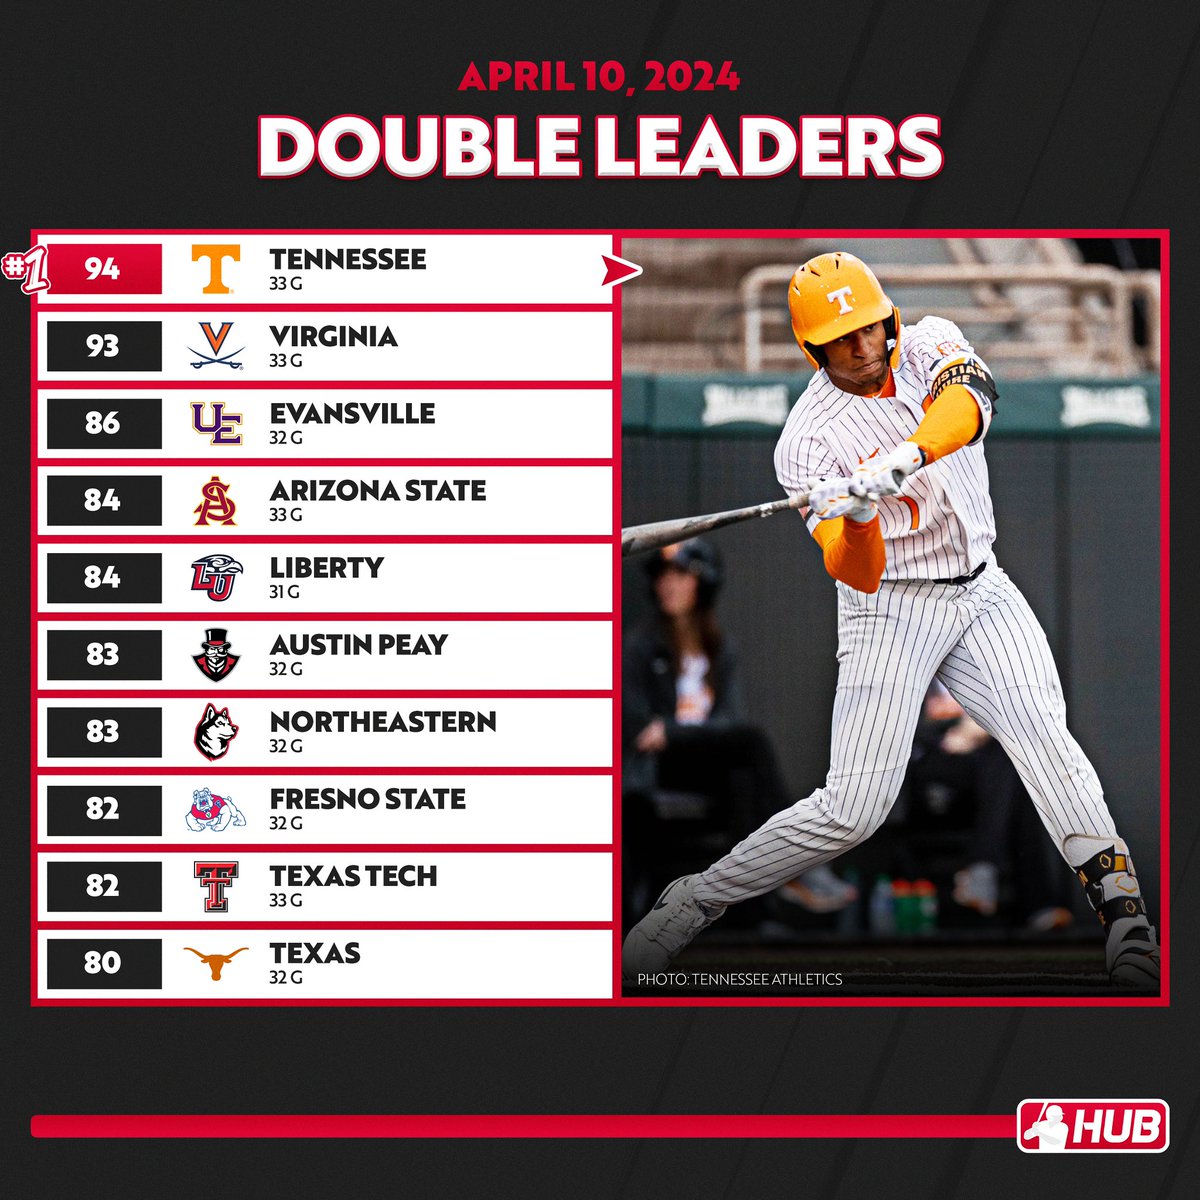 D1 team double leaders through games played on April 9th